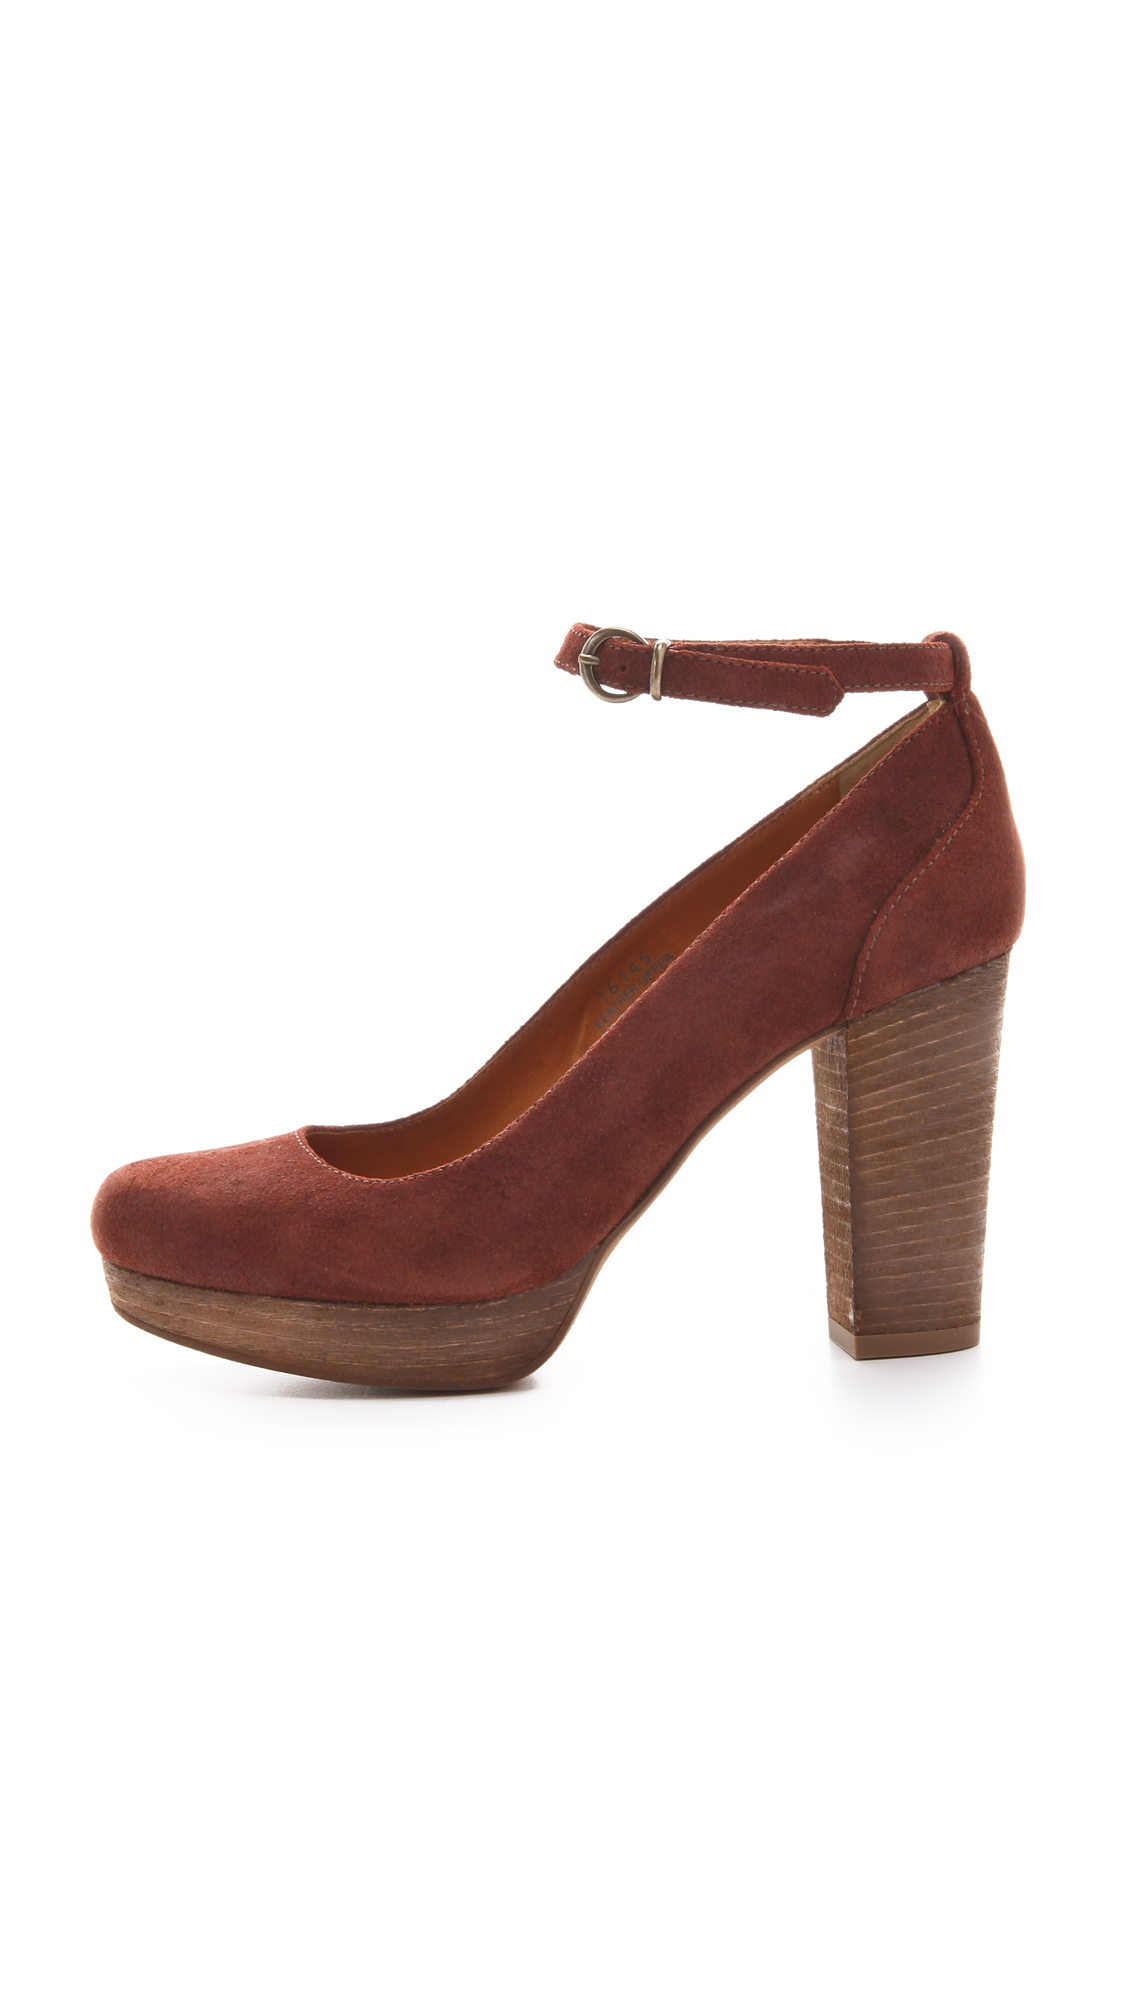 Lyst - Madewell Ankle Strap Pumps in Brown